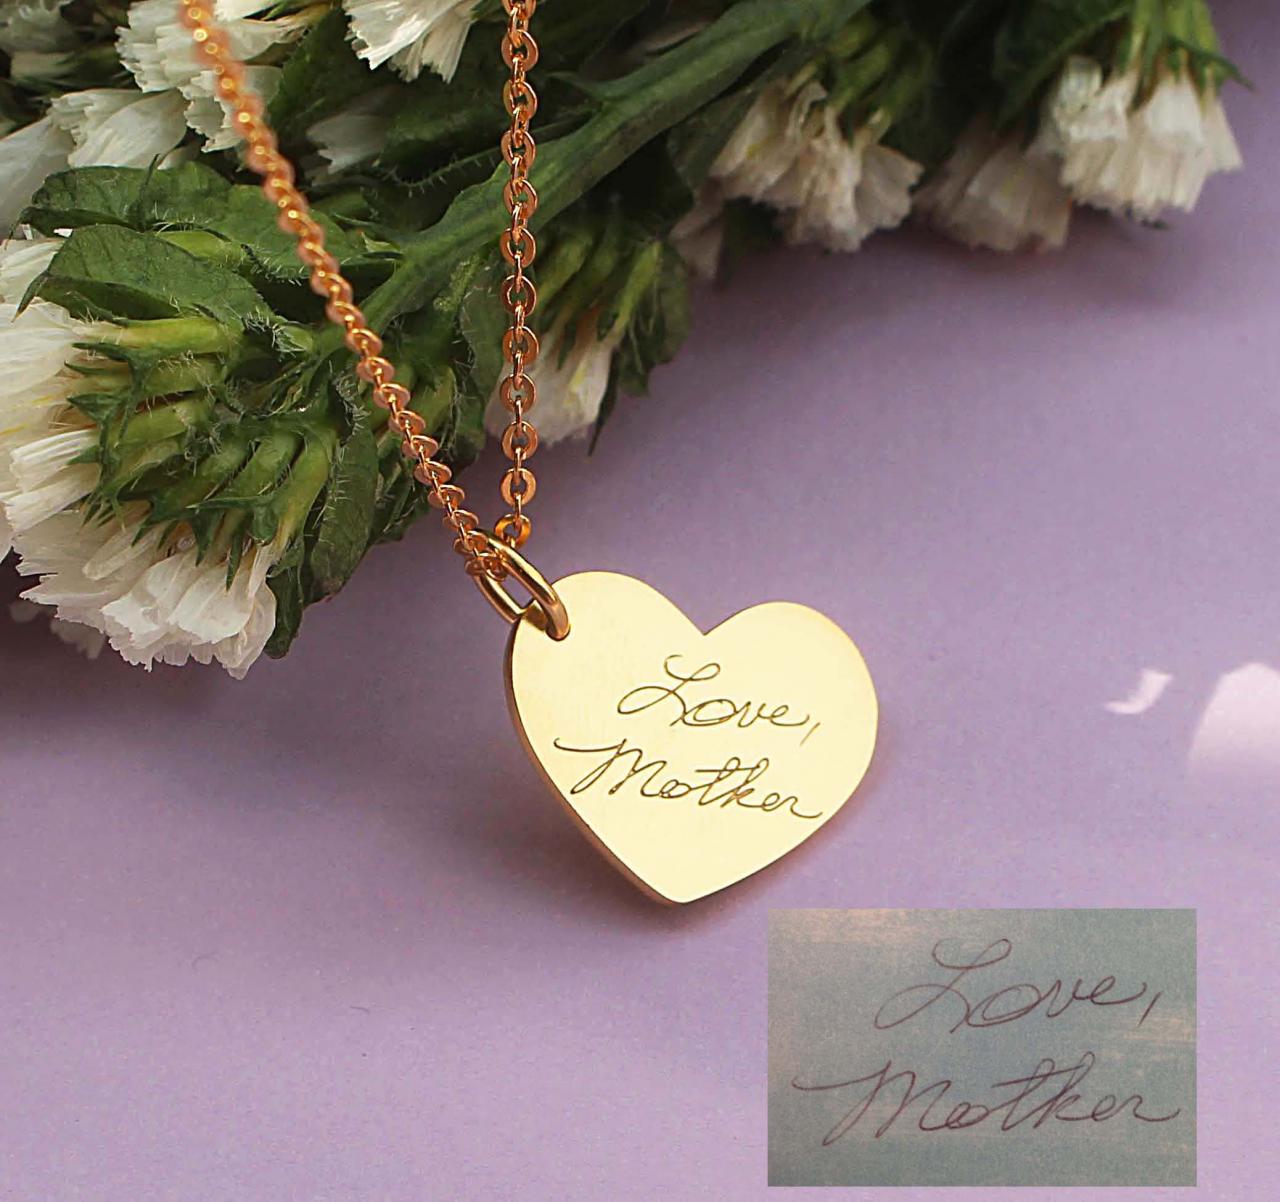 Actual Fingerprint Necklace - Personalized Handwriting Necklace - Heart Engrave Necklace - Memorial Jewelry